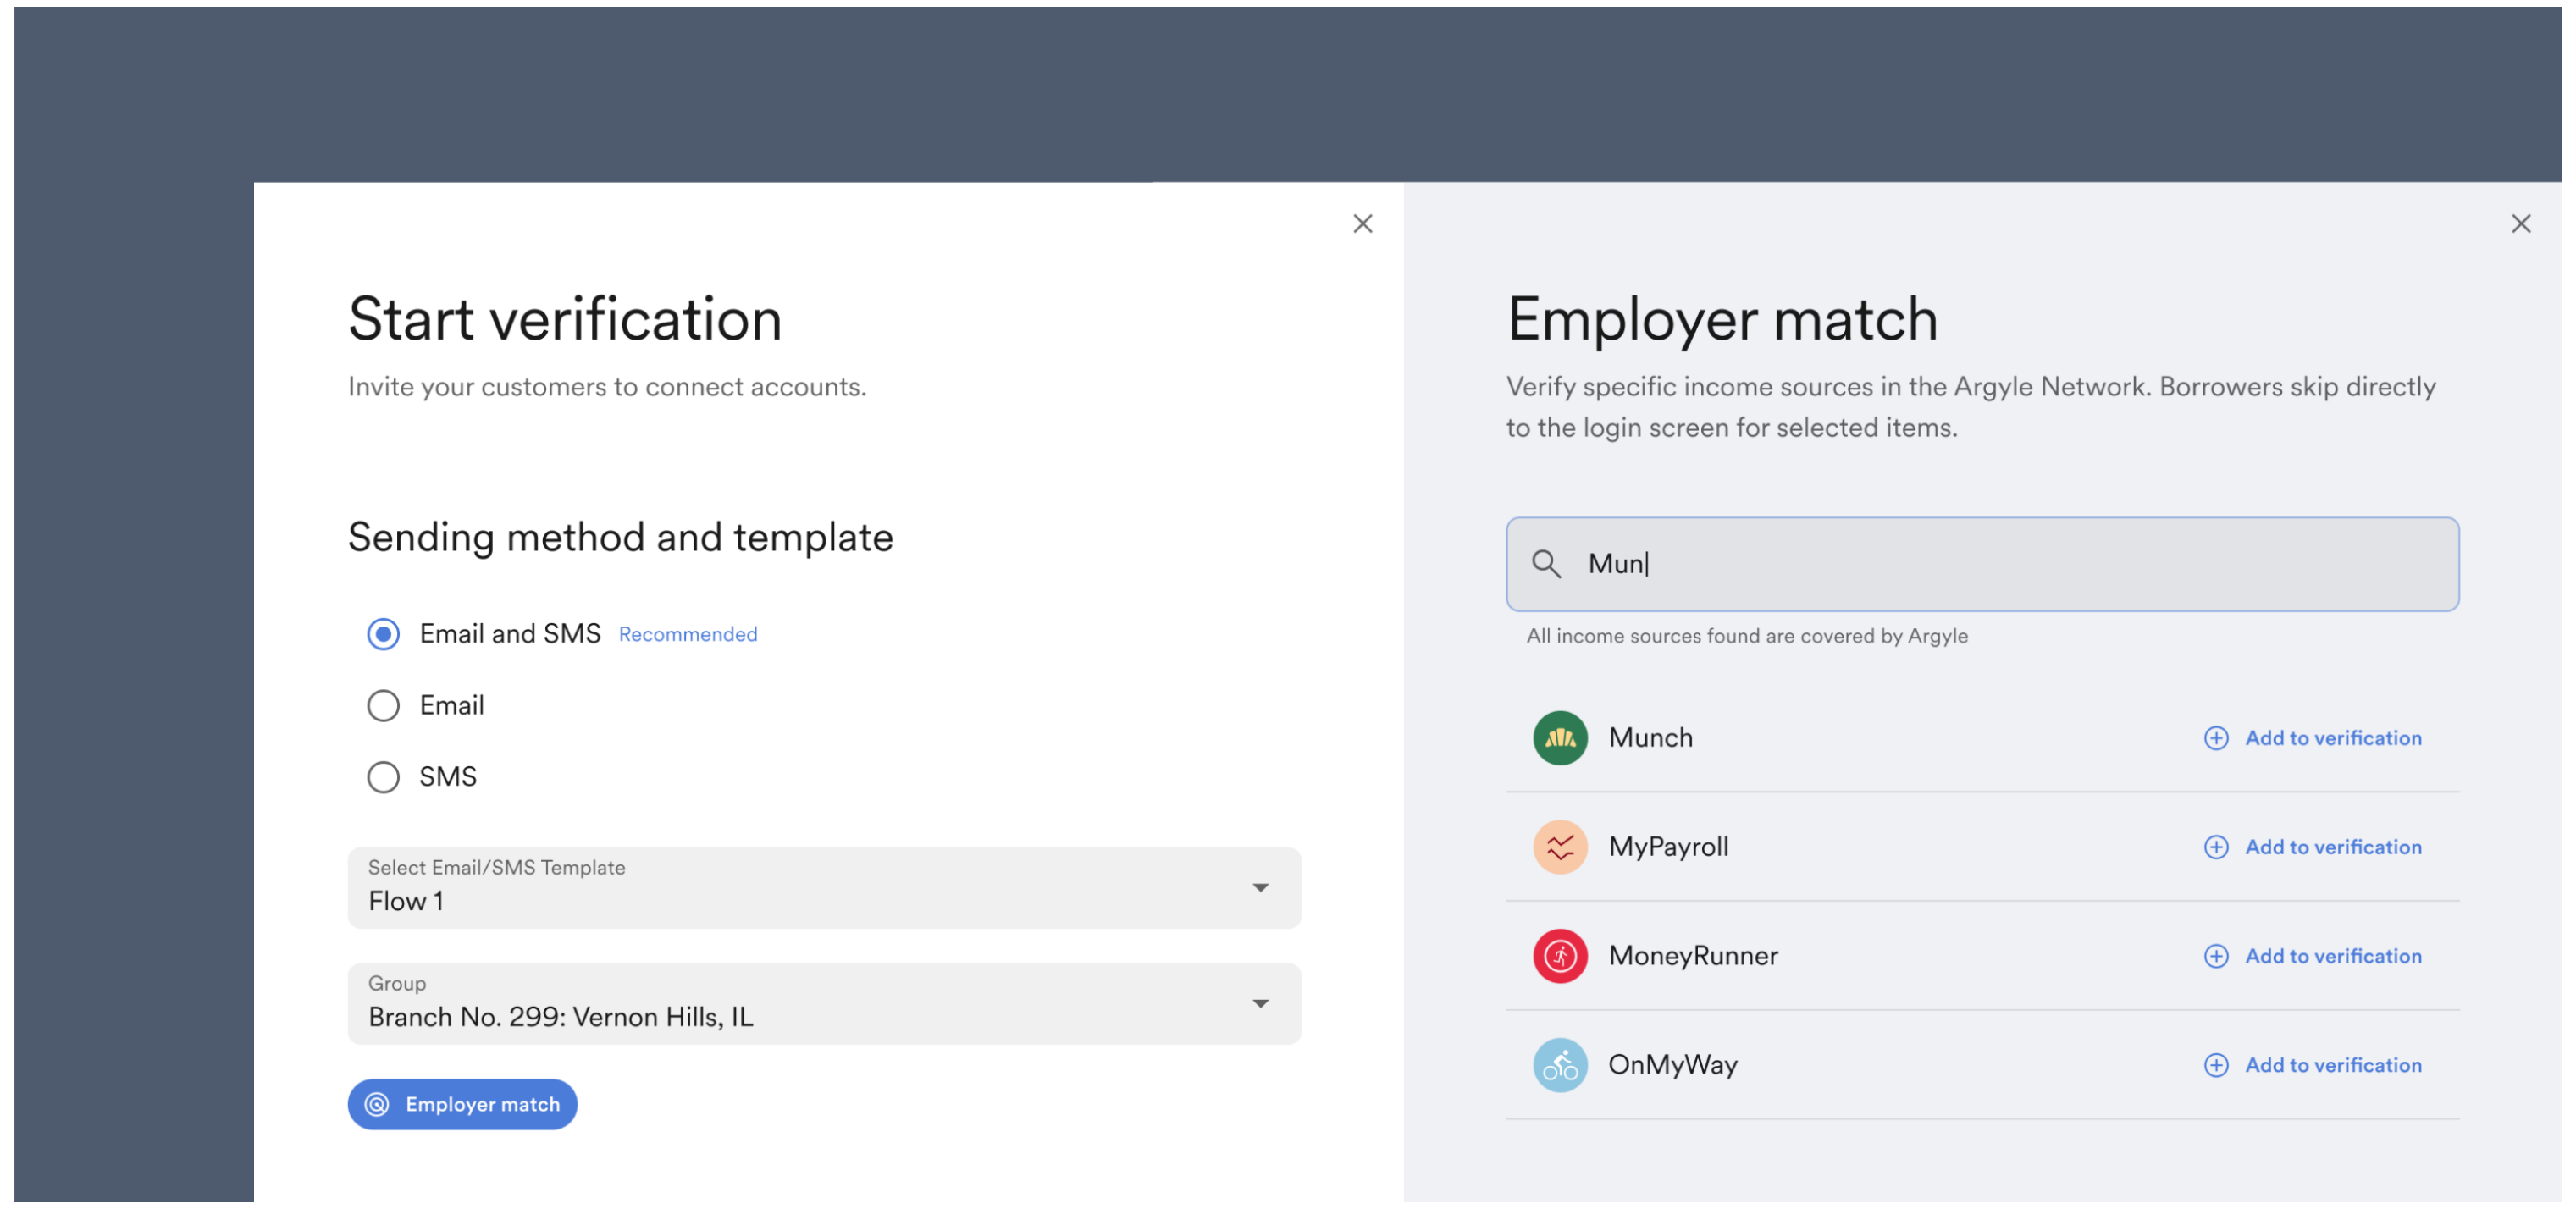 Employer match let's you search for the user's employer and send them a direct link to that employer in their invitation.